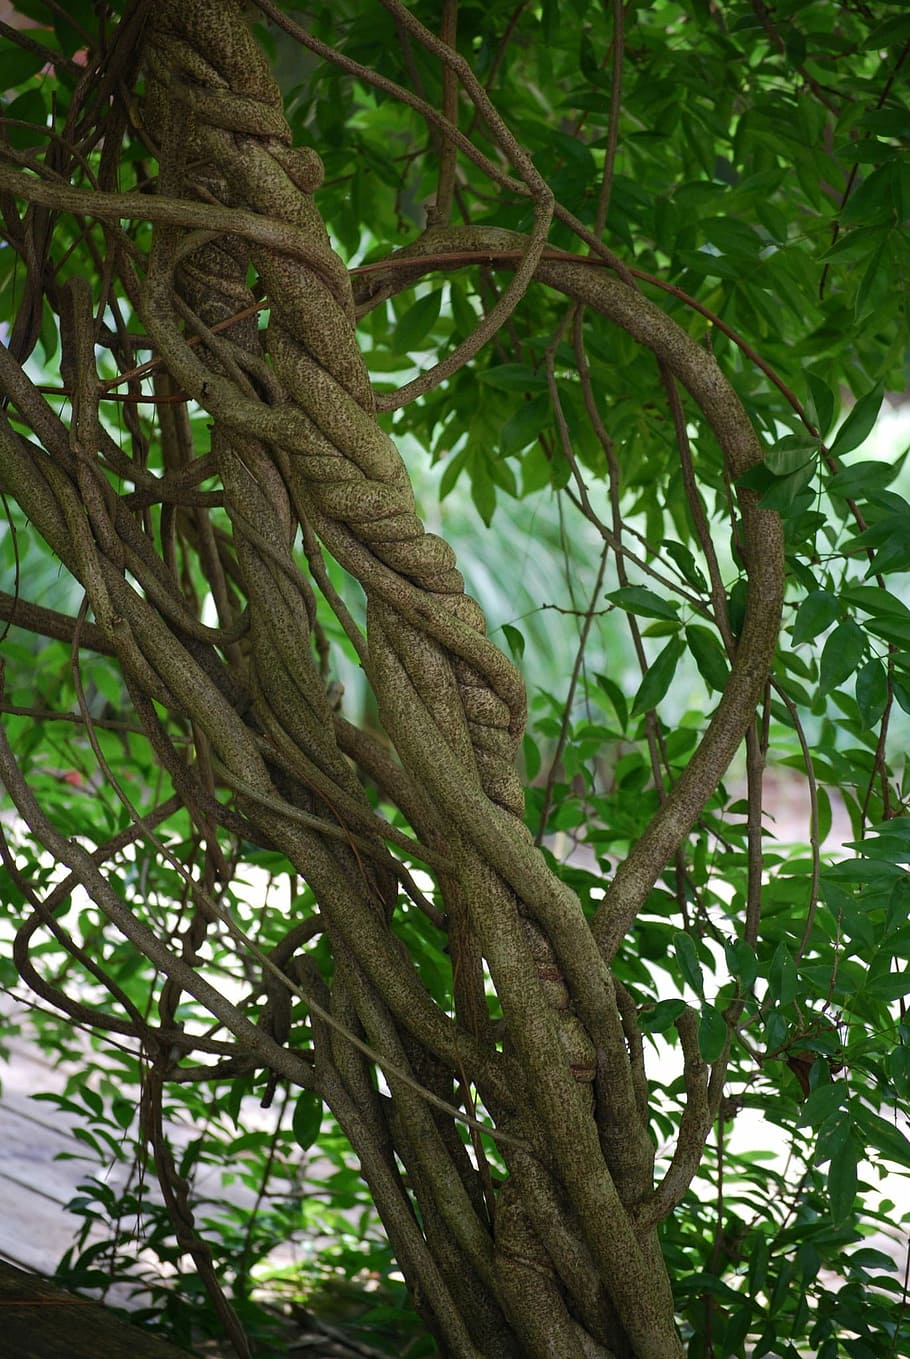 Entwined, Braid, Sculpture, Vines, Trees, nature, garden, tree, branch, green color